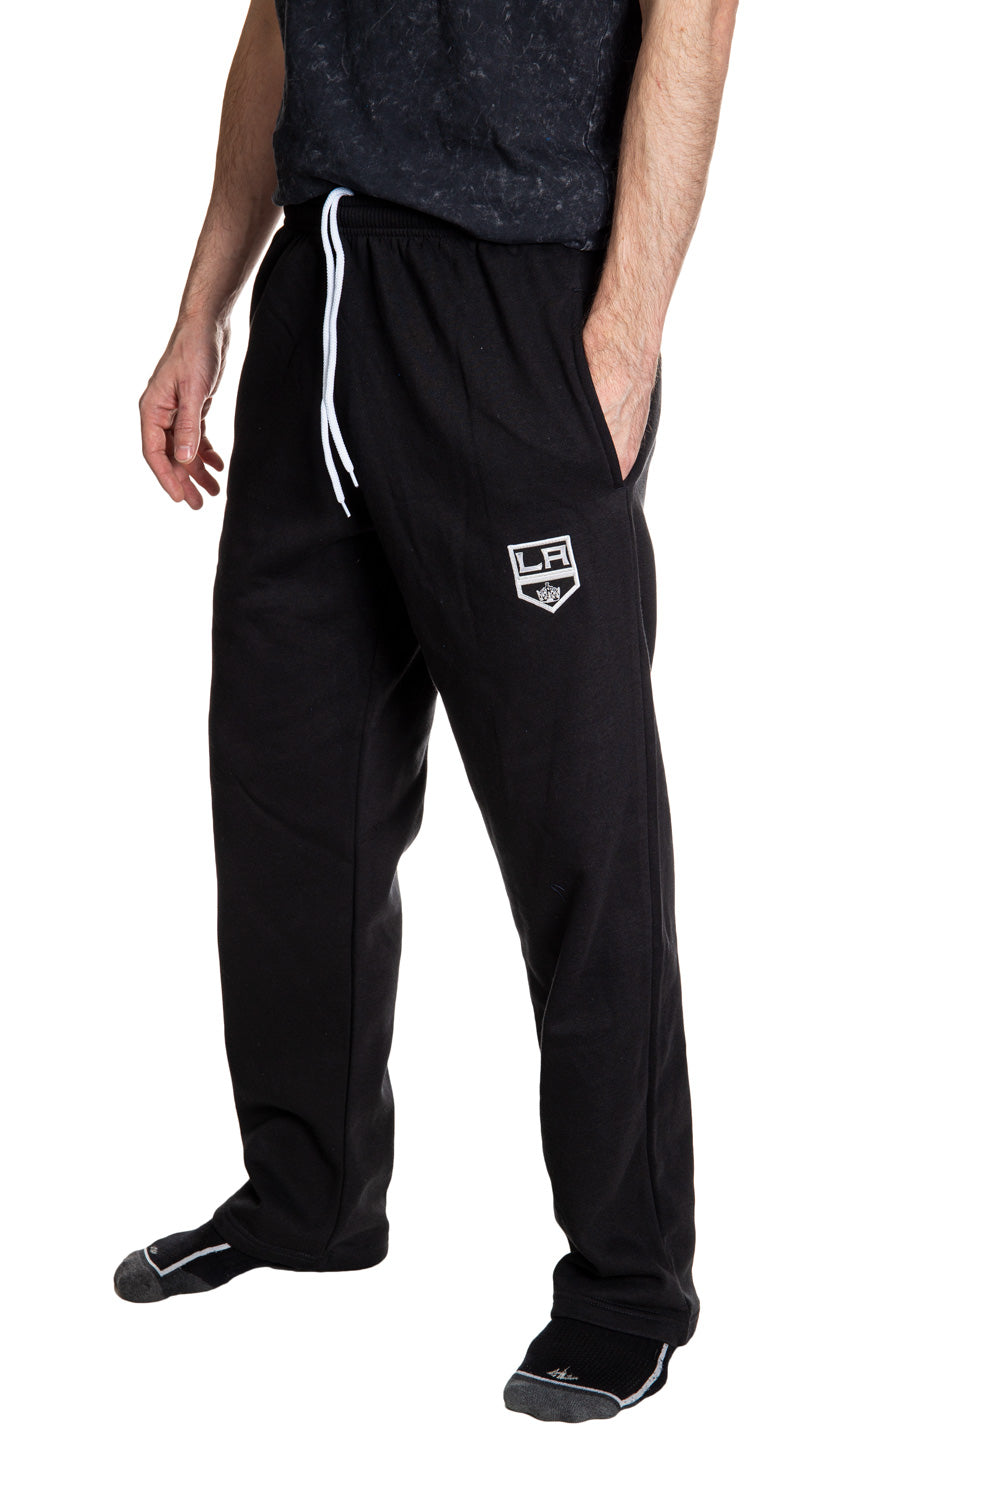 Los Angeles Kings Premium Fleece Sweatpants Side View of Embroidered Logo.